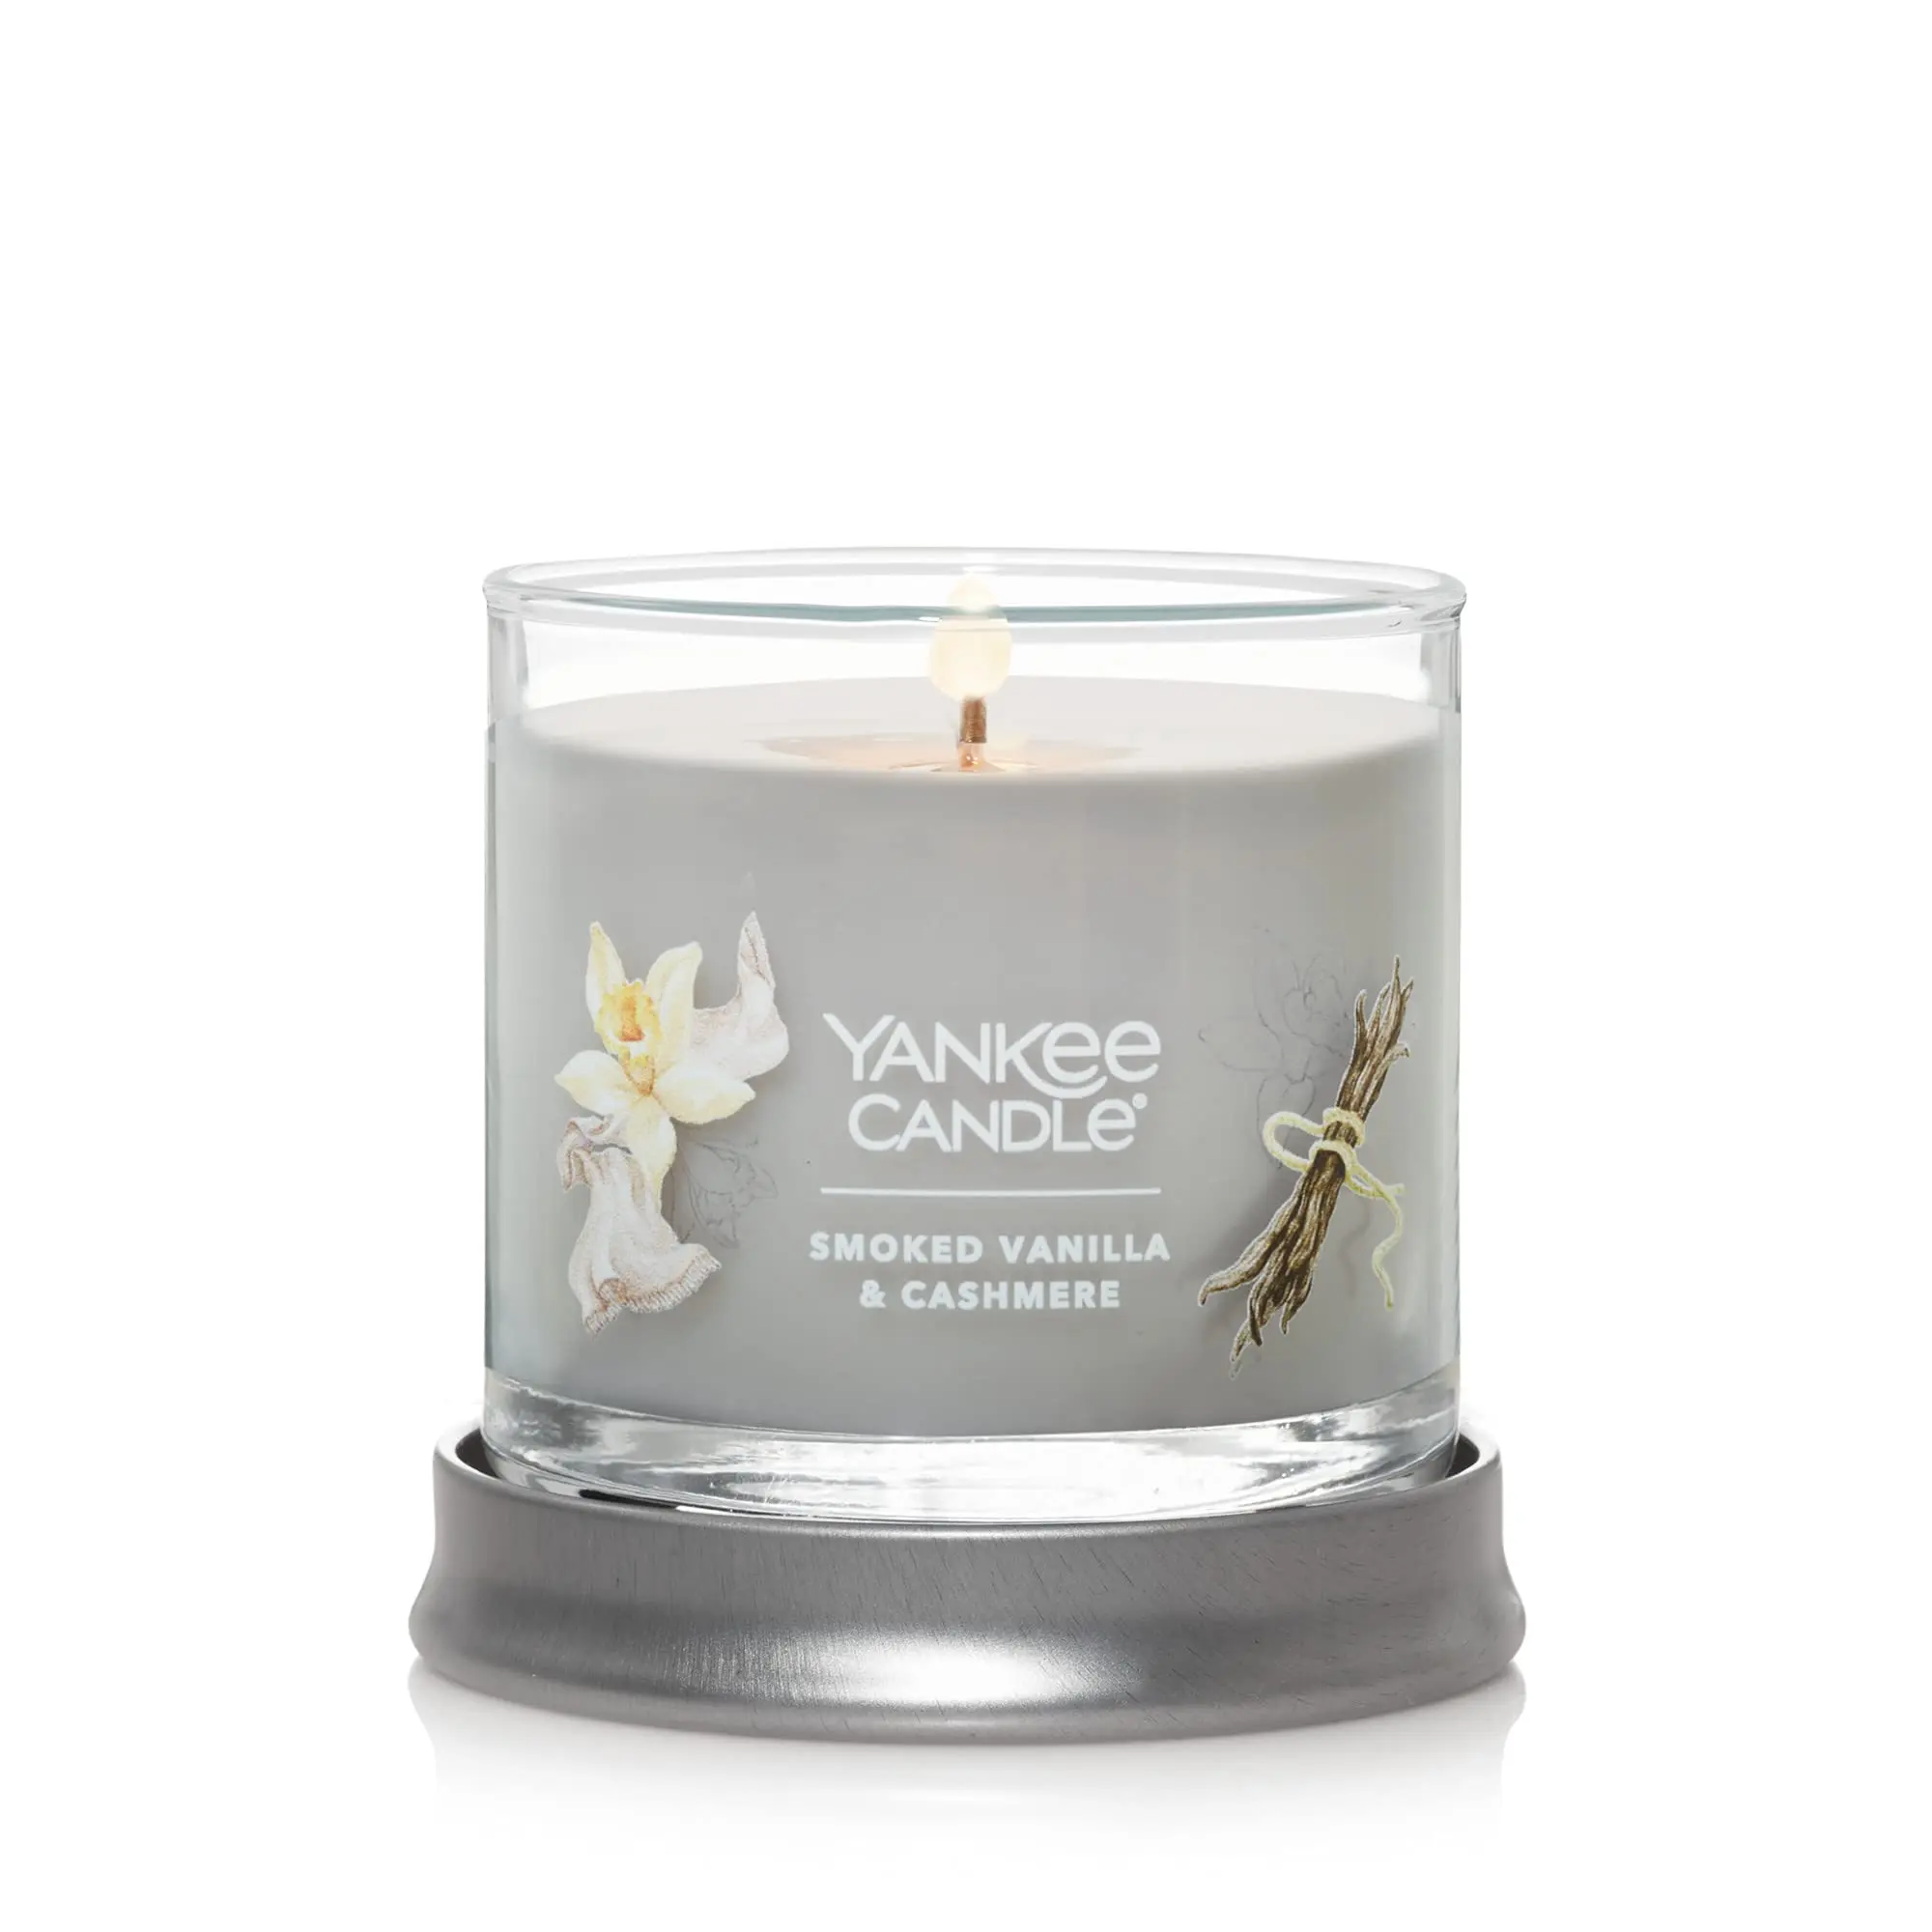 smoked vanilla cashmere - What does Yankee cashmere smell like